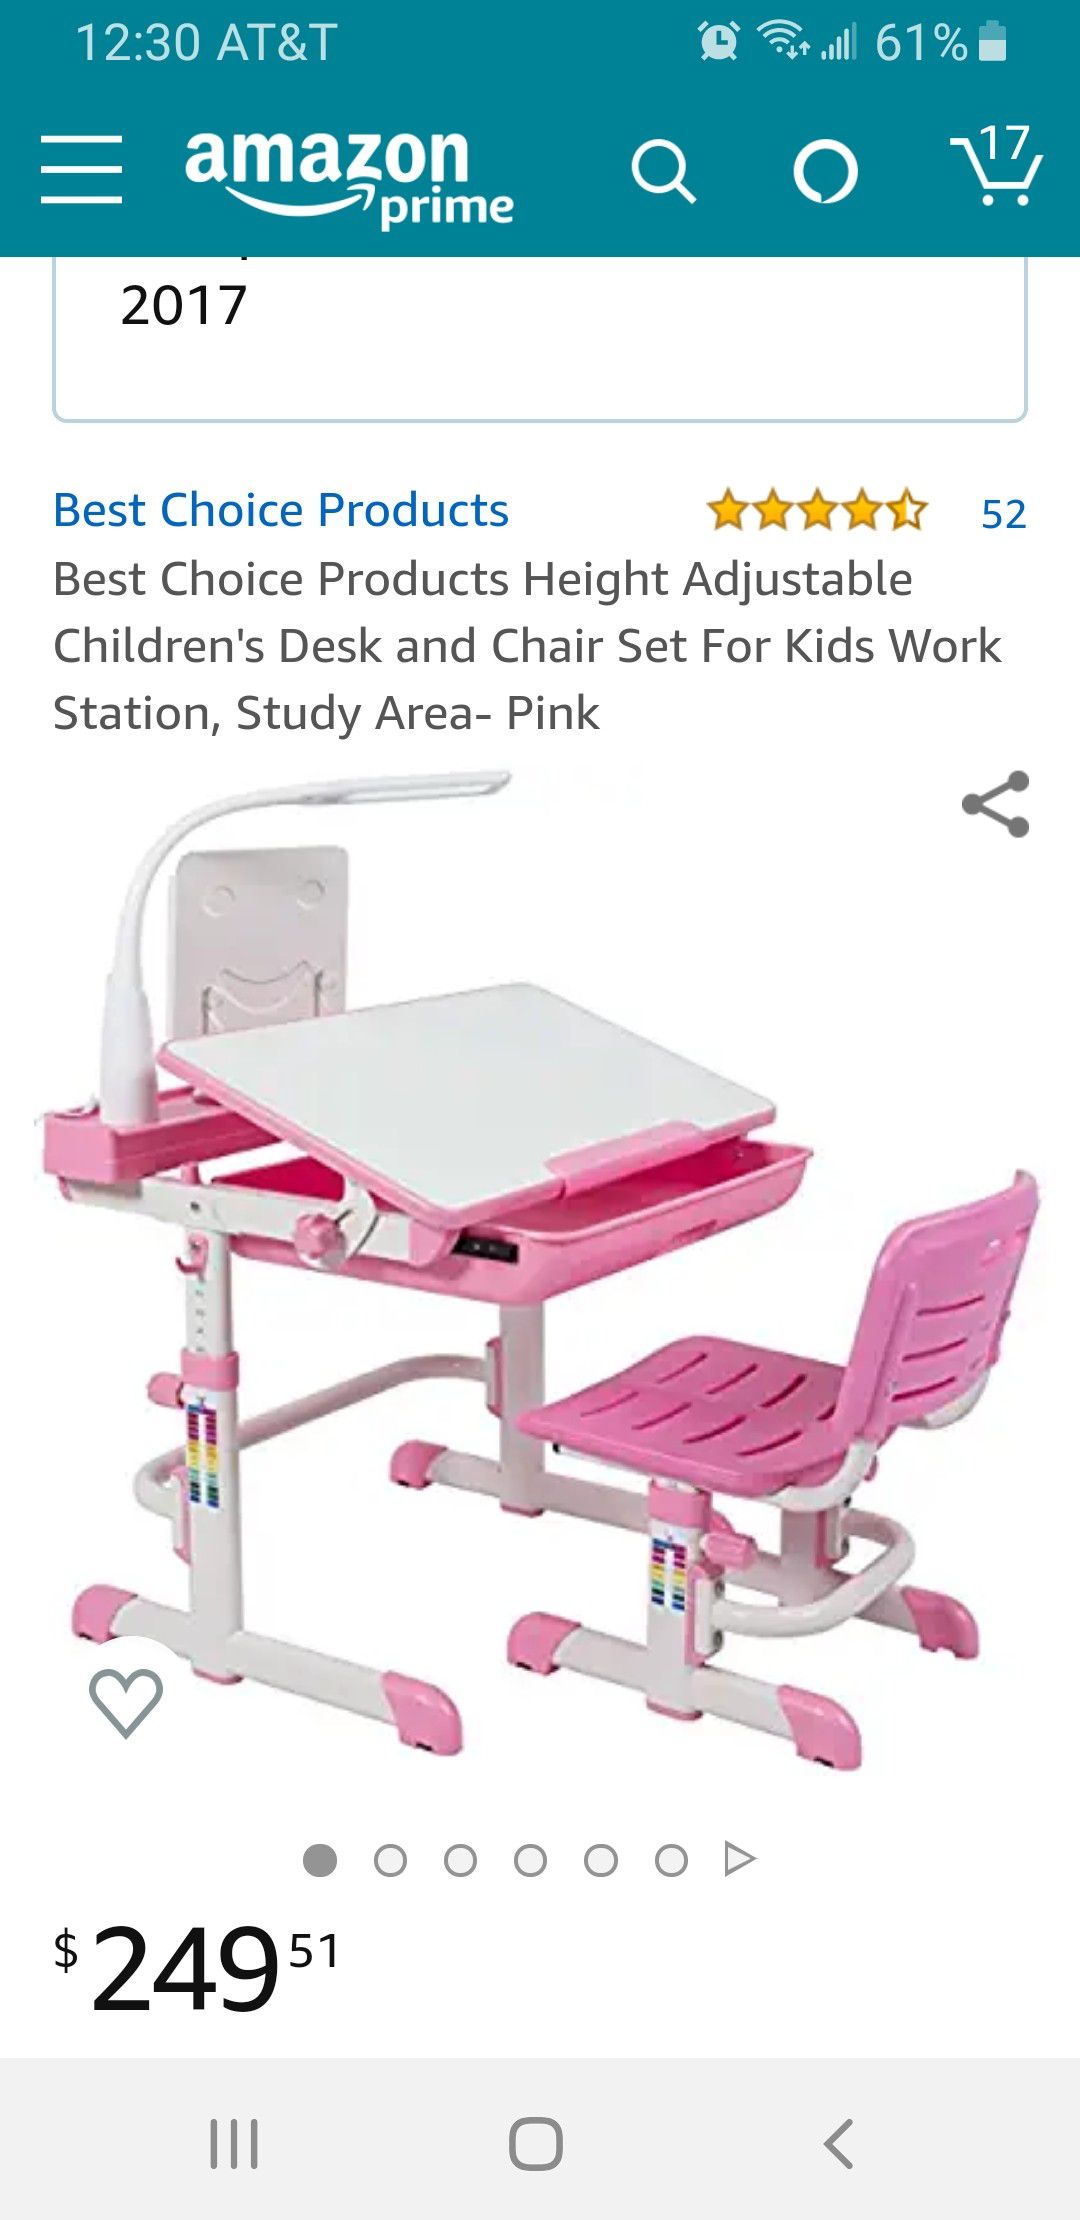 Children's Desk and Chair Set For Kids Work Station, Study Area- Pink